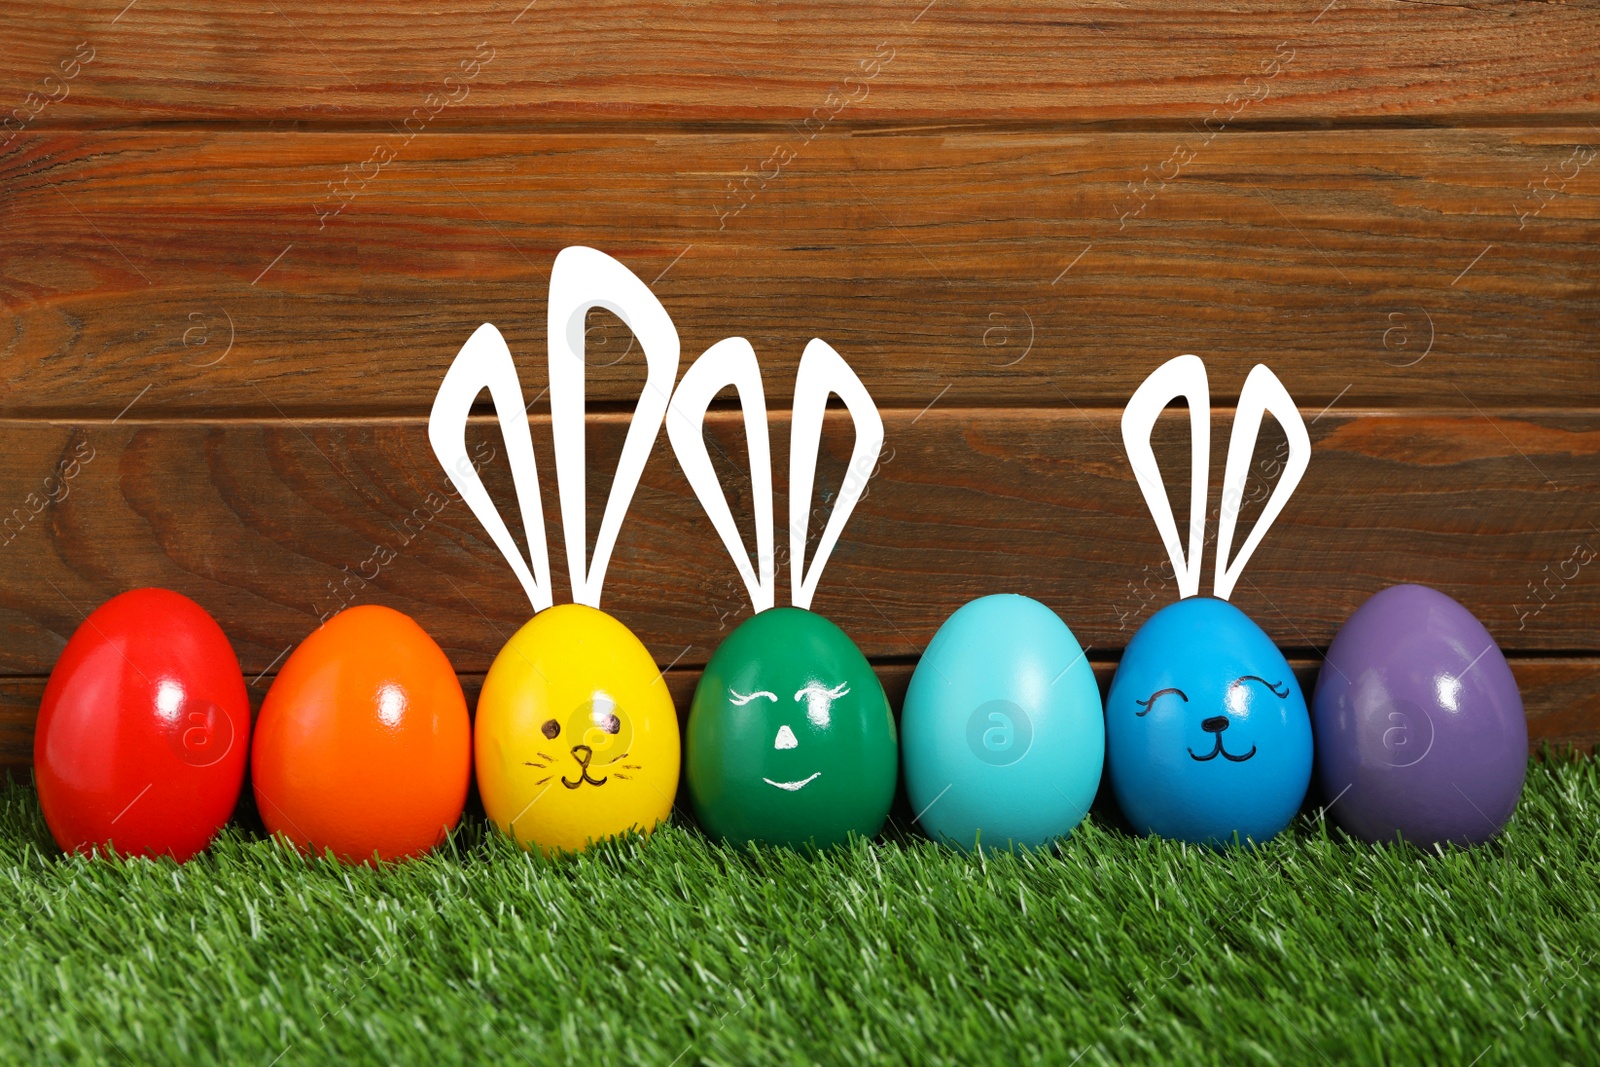 Image of Several eggs with drawn faces and ears as Easter bunnies among others on green grass against wooden background